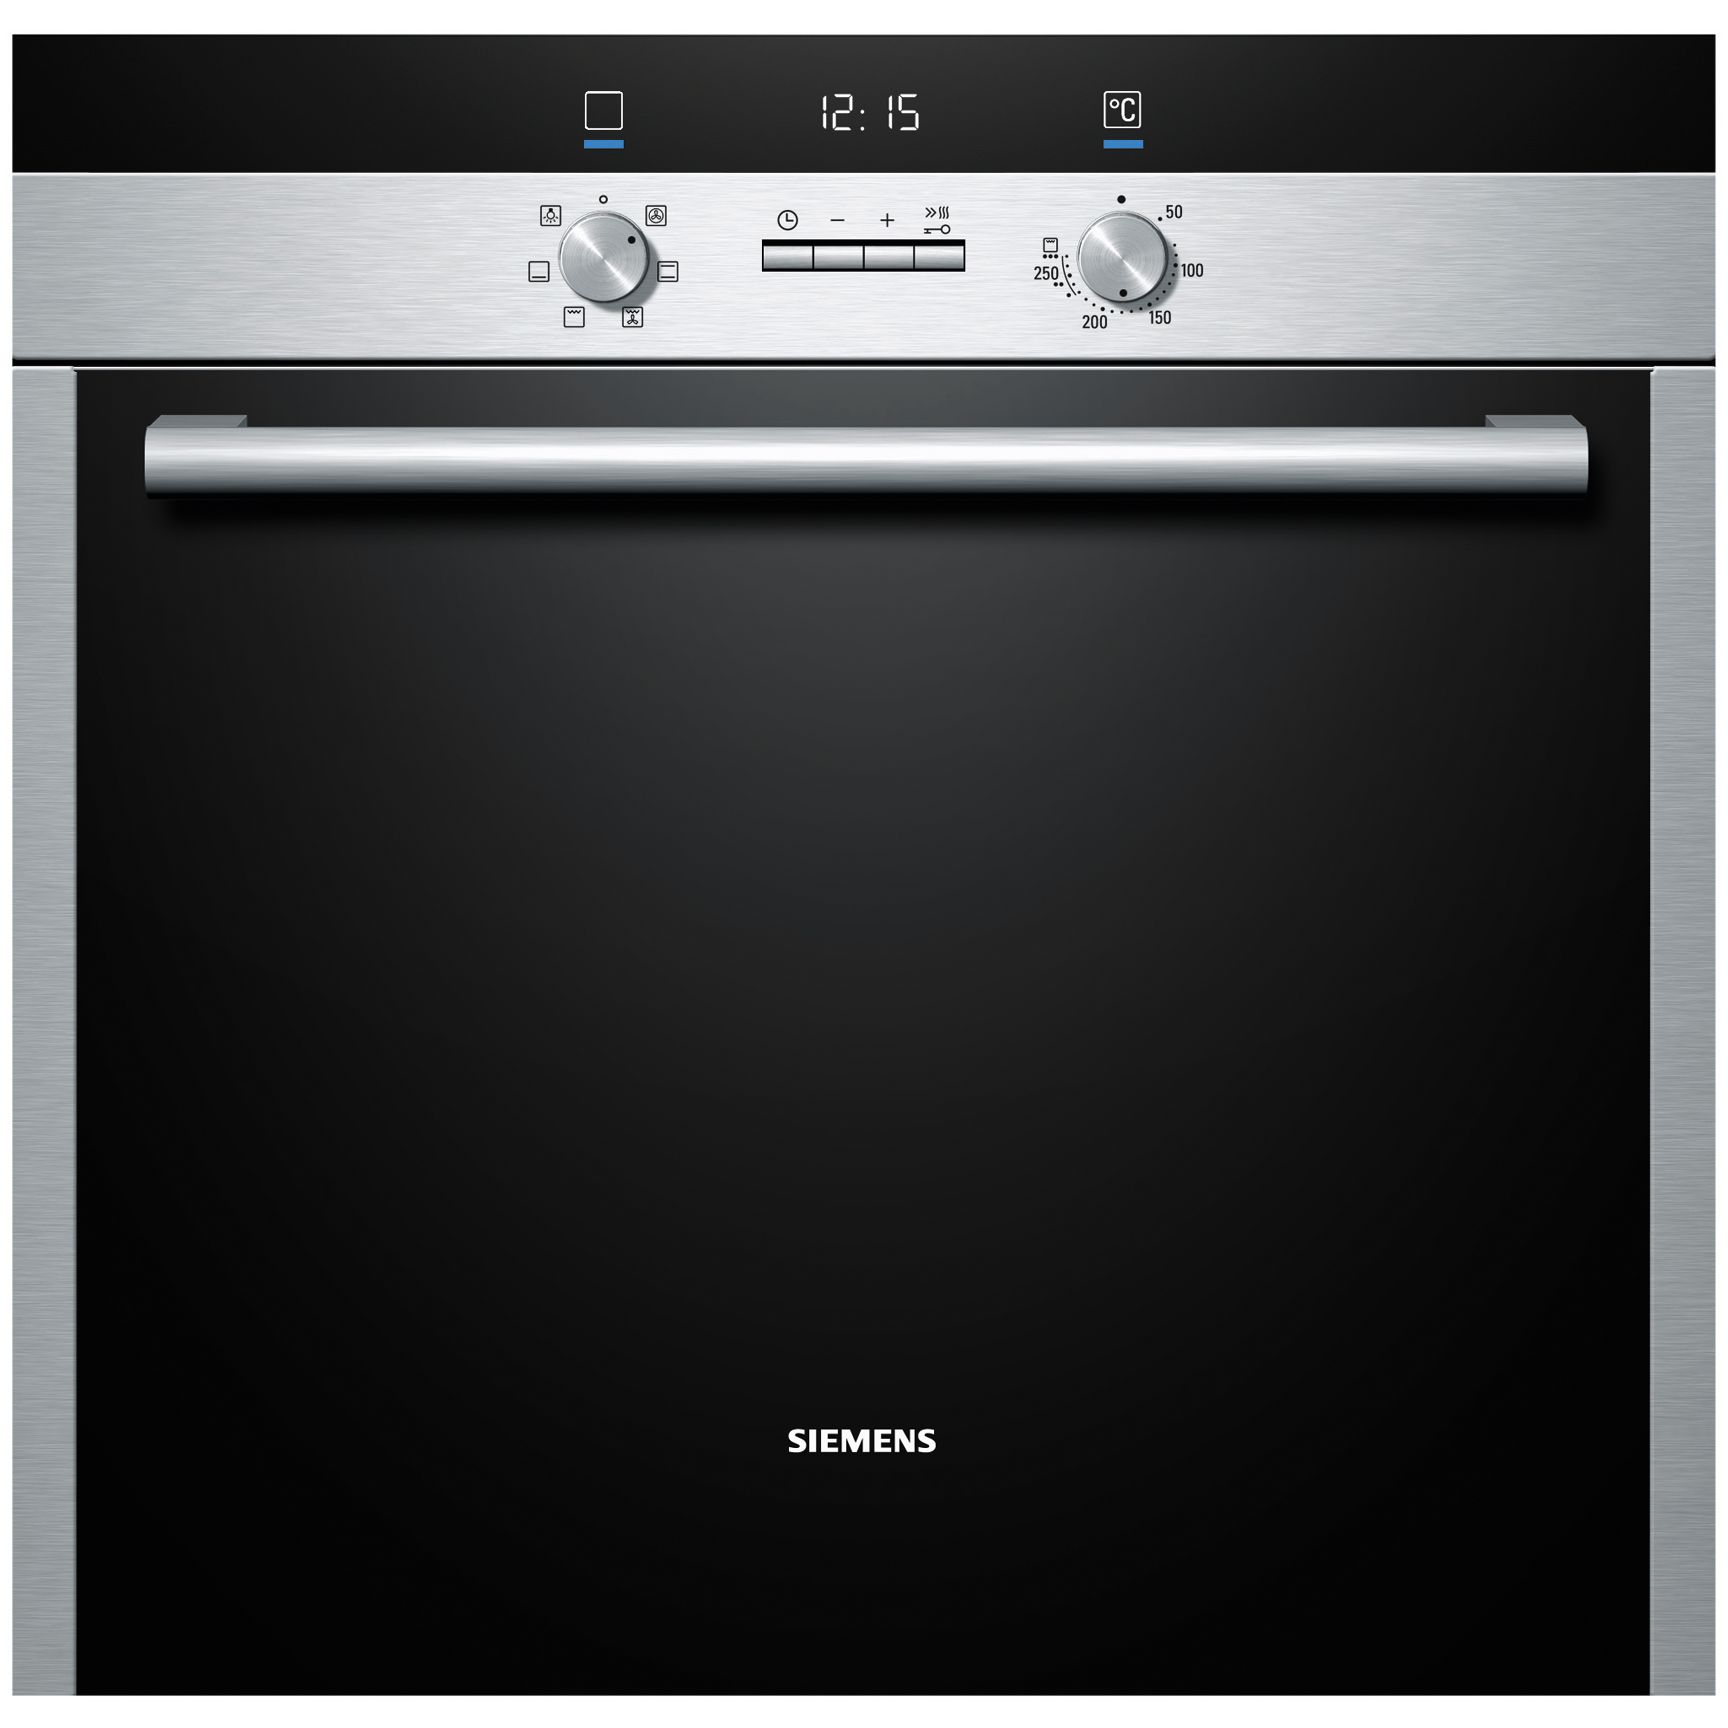 Siemens HB43AB550B Single Electric Oven, Stainless Steel at John Lewis